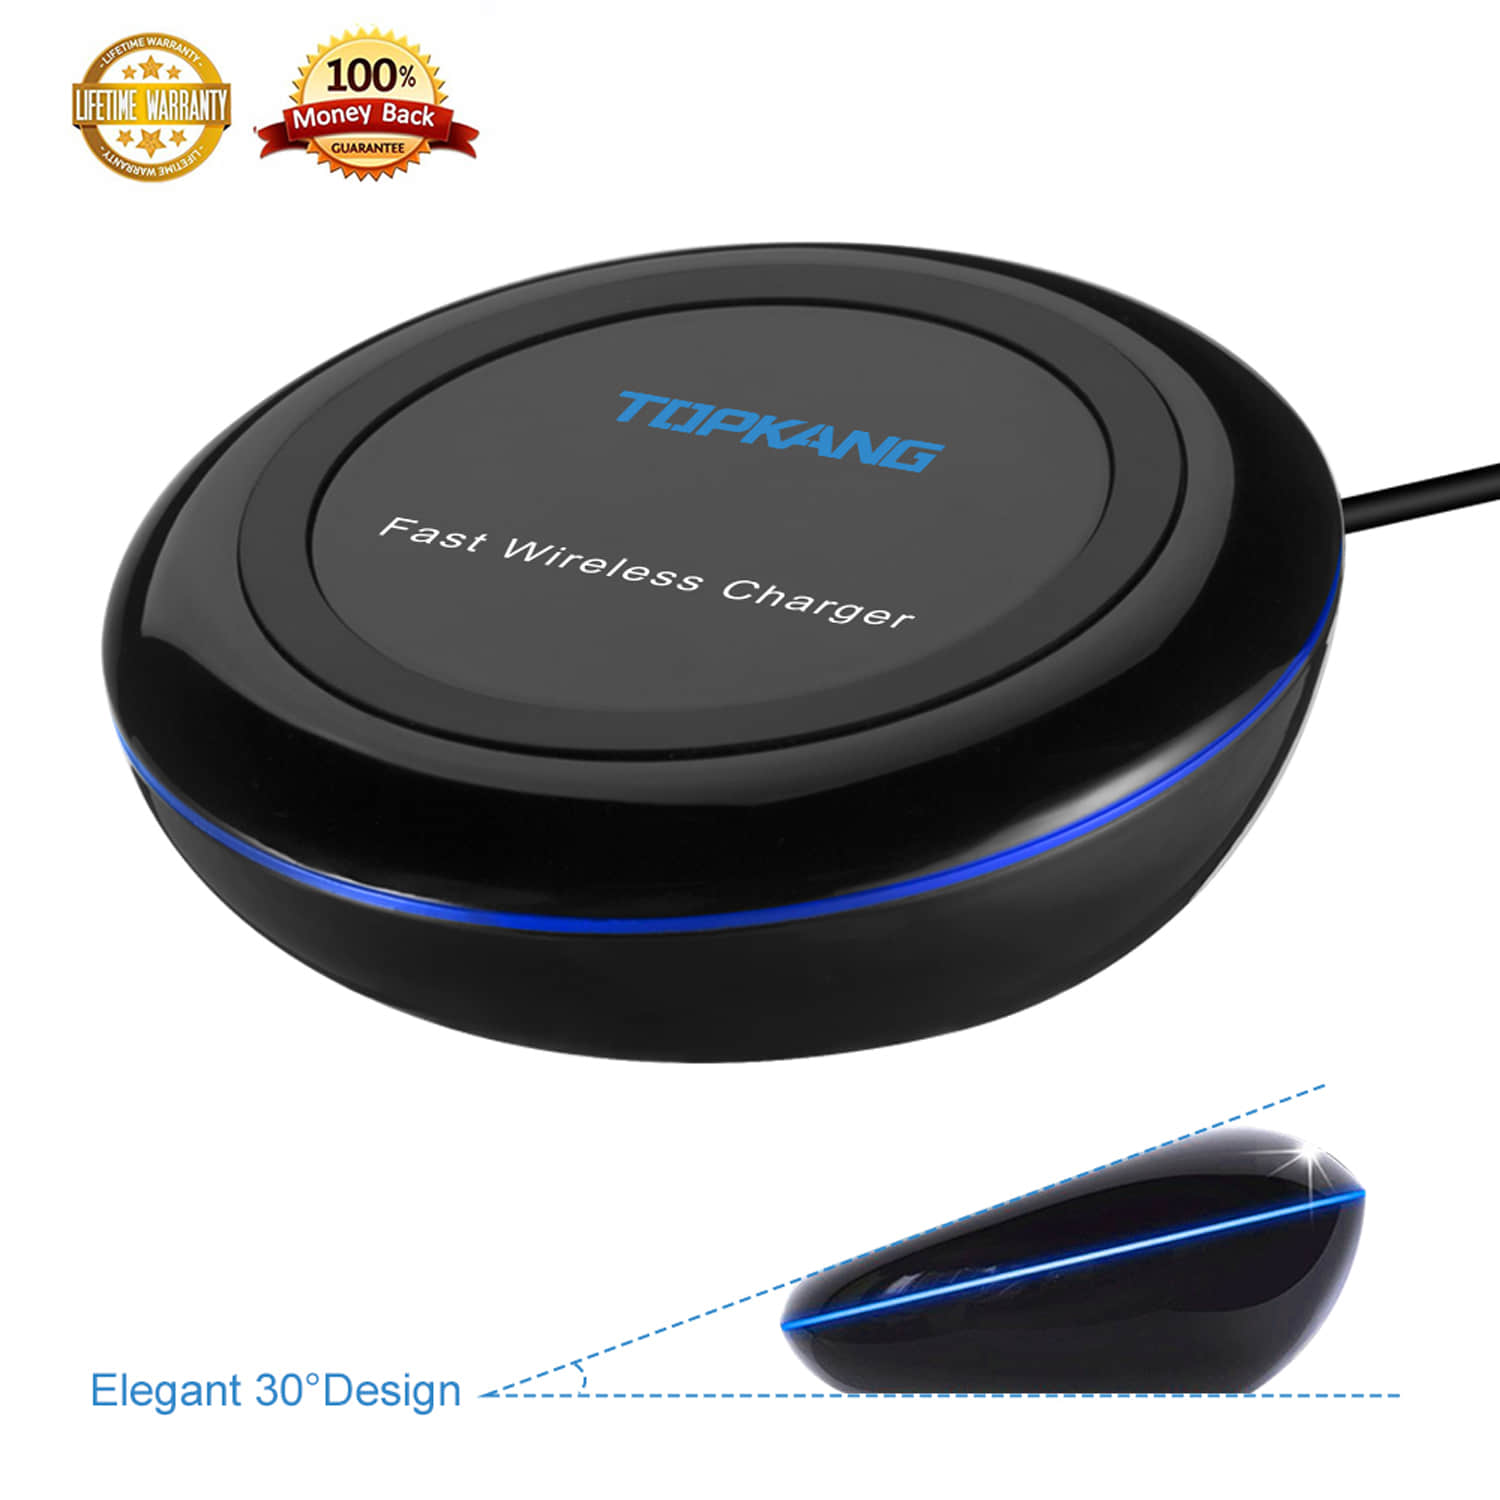 Wireless Charger for Samsung, Fast Wireless Charger,iPhone Wireless Charger,Wireless Charger for iPhone 8 plus,iPhone X,iPhone 8 and Samsung Galaxy S9,S8,S7,S5,S6